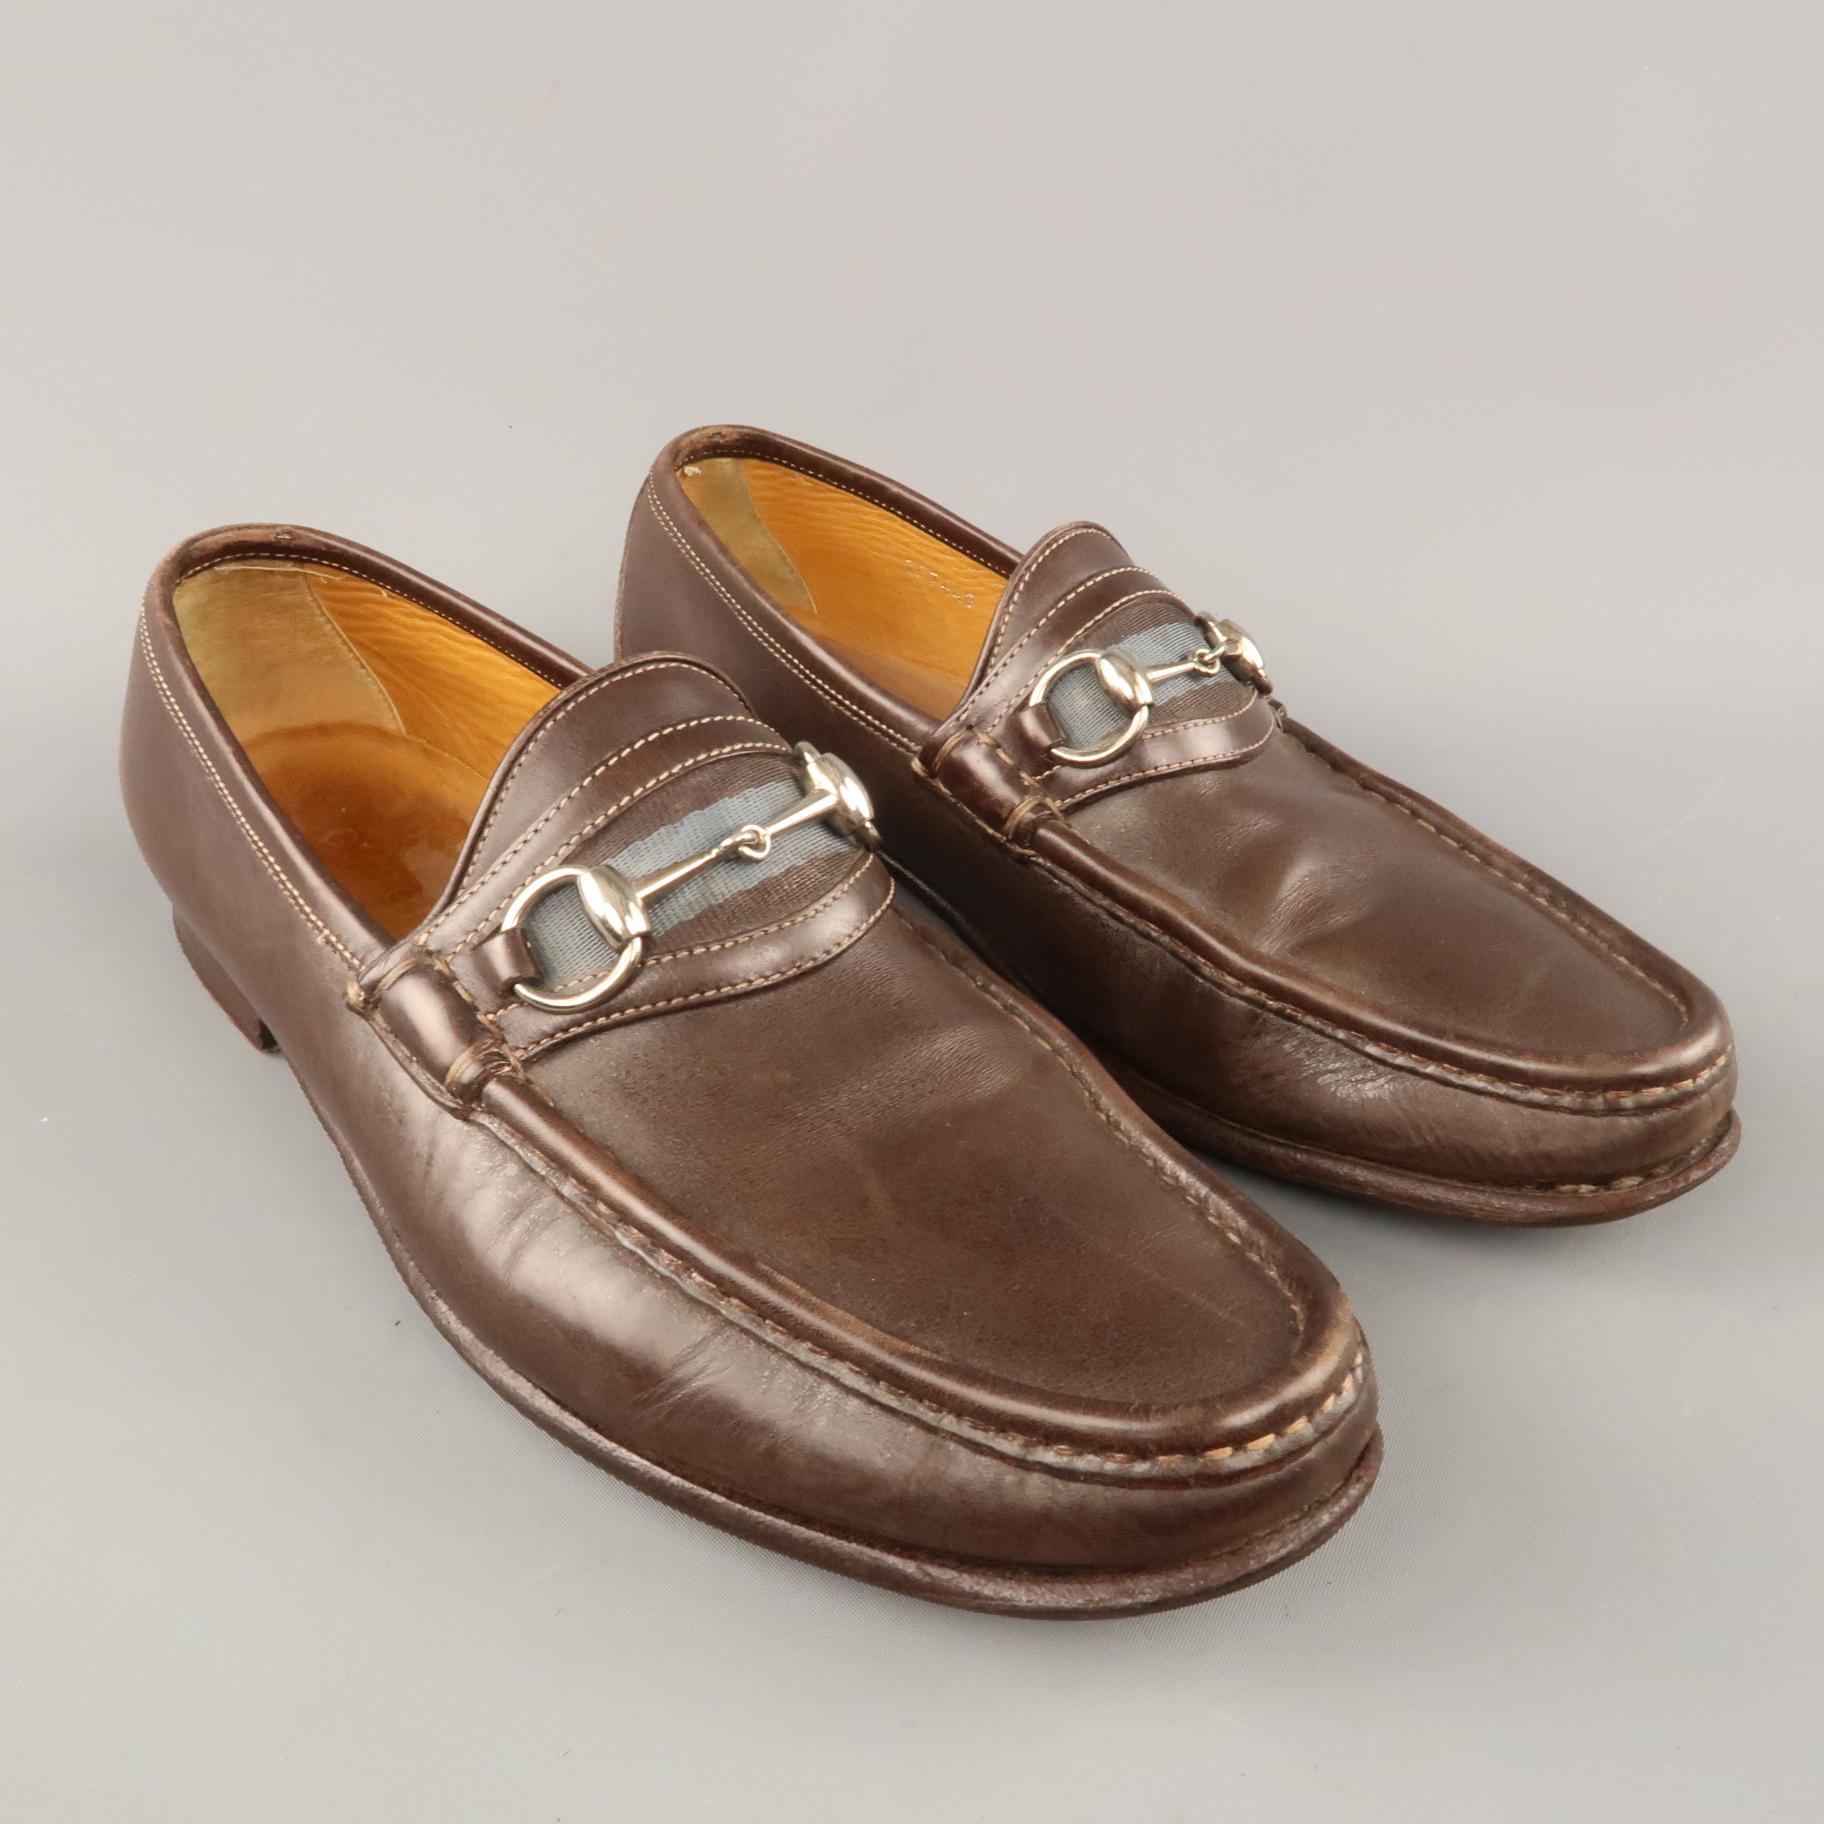 GUCCI loafers come in brown leather with an apron toe, detailed with a blue striped webbing strap and silver tone metal horsebit. Wear throughout. Made in Italy.
 
Good Pre-Owned Condition.
Marked:9 D
 
Outsole: 11.5 x 4 in.